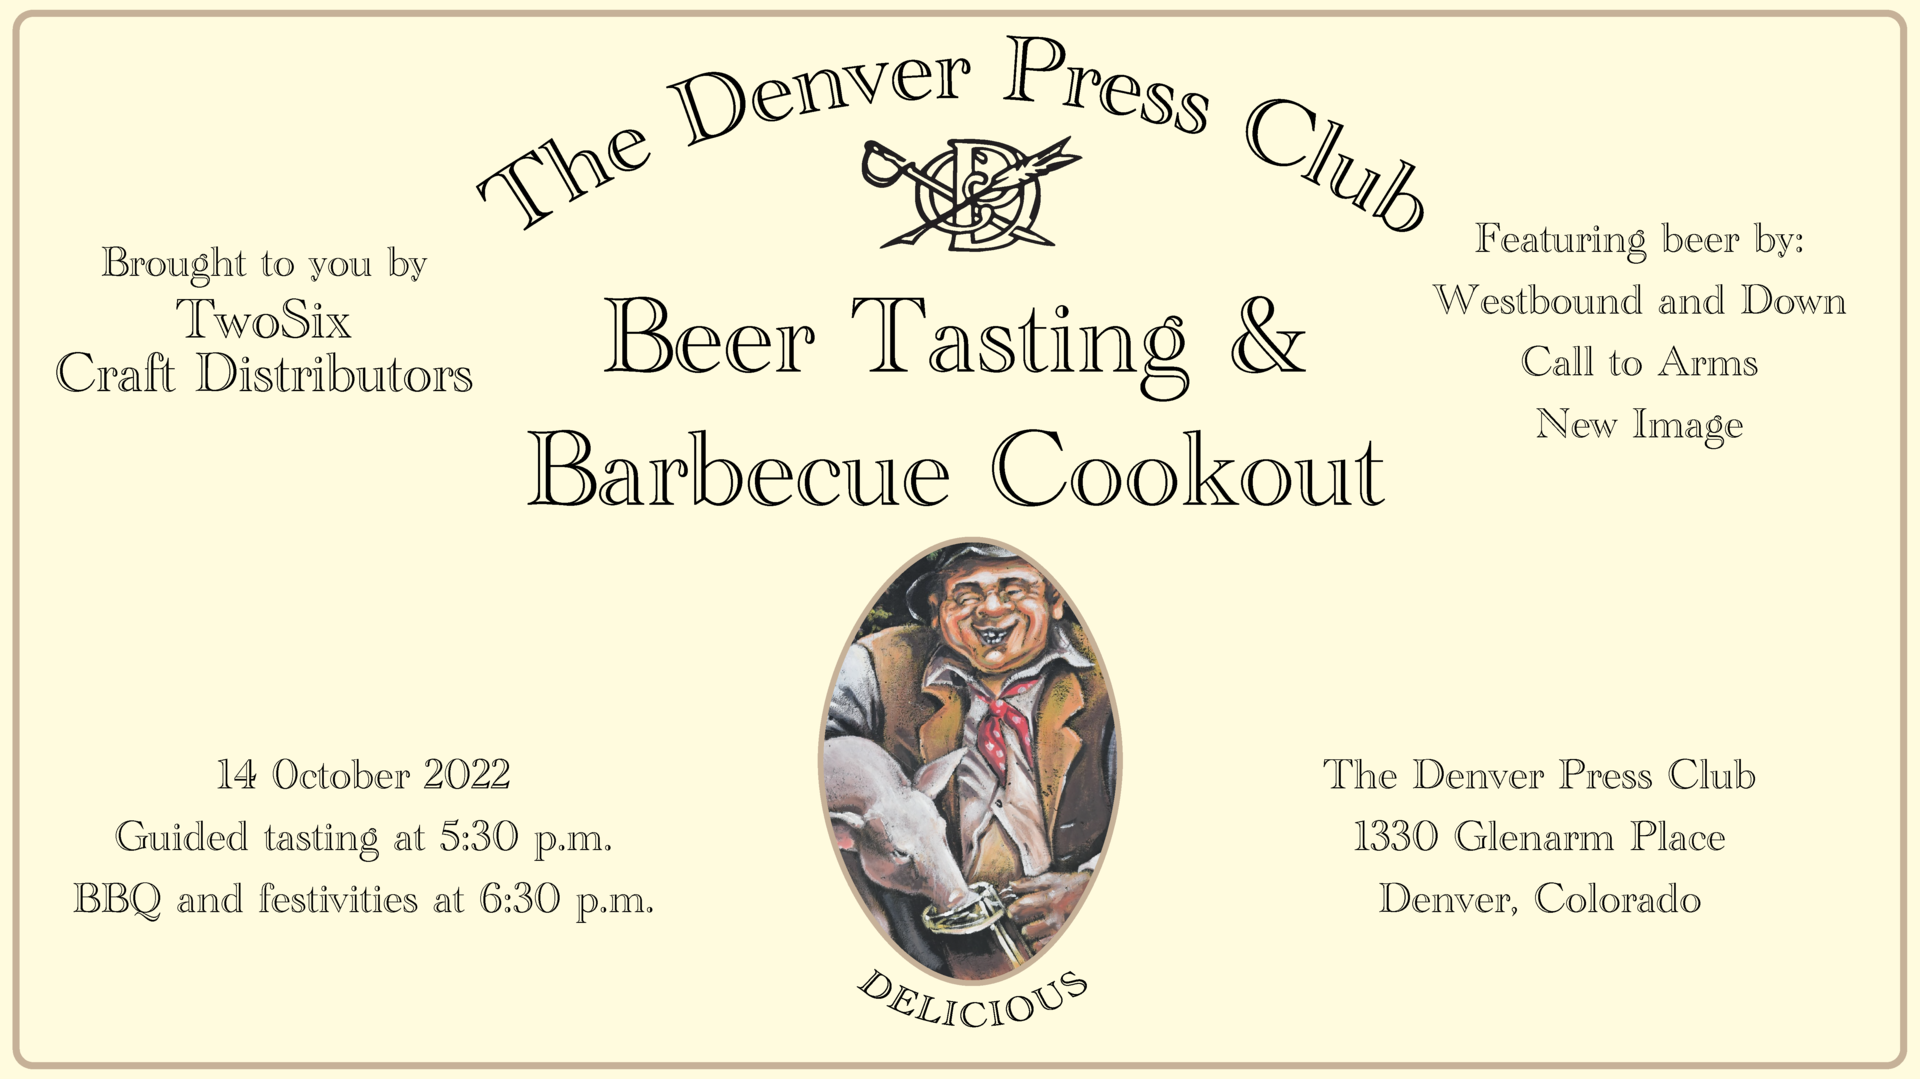  Beer Tasting and Barbecue Cookout